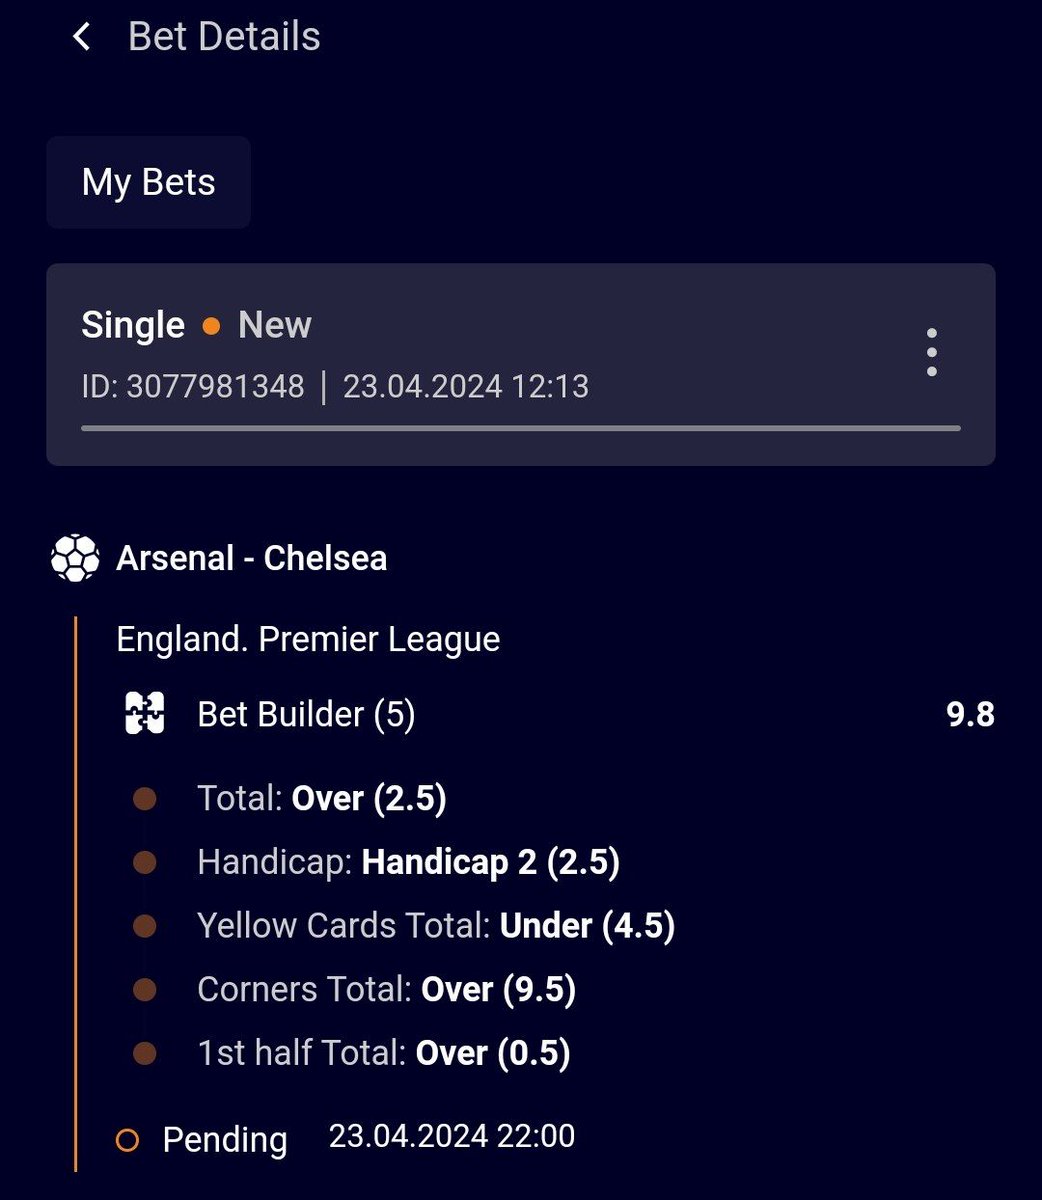 💥Arsenal vs Chelsea Bet Builder 9.8 odds✅✅ On #BETAFRIQ Don't have an account? Register 👉👉 cutt.ly/Zw7Xc43E Join the journey